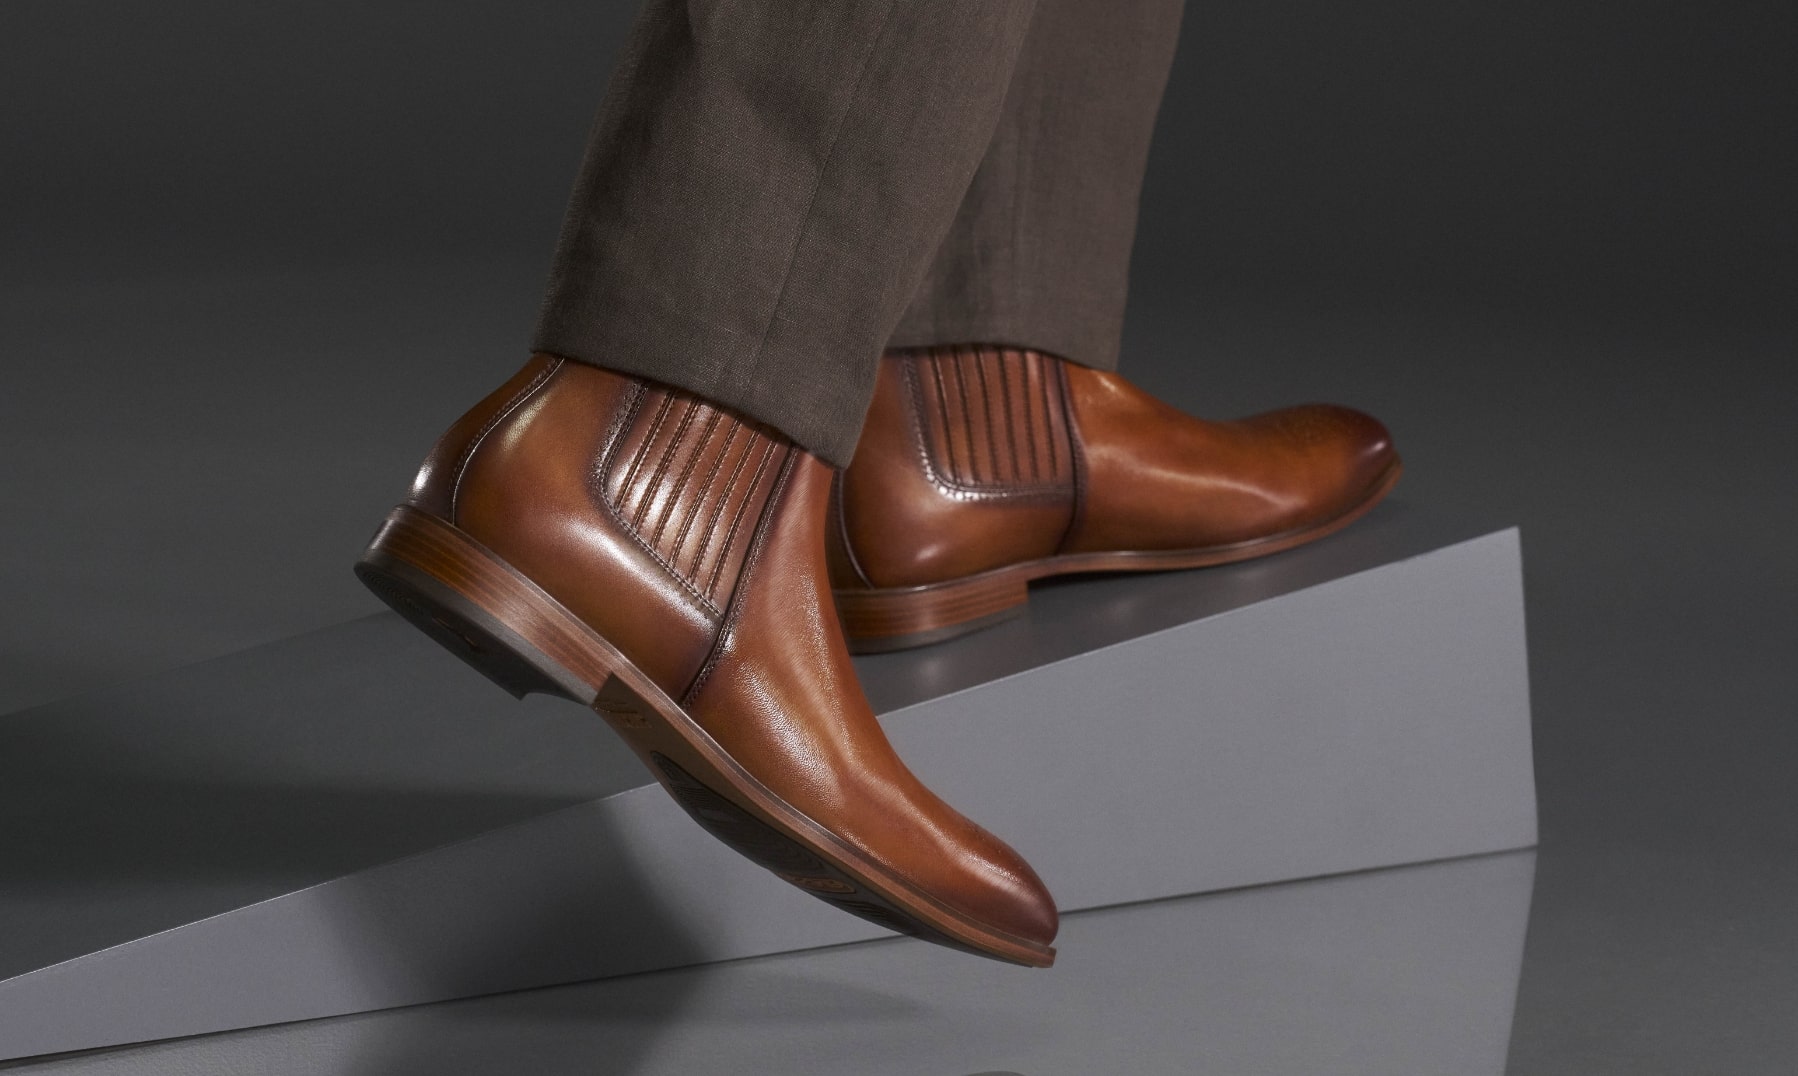 Stacy Adams boots featuring the Bradley in cognac.